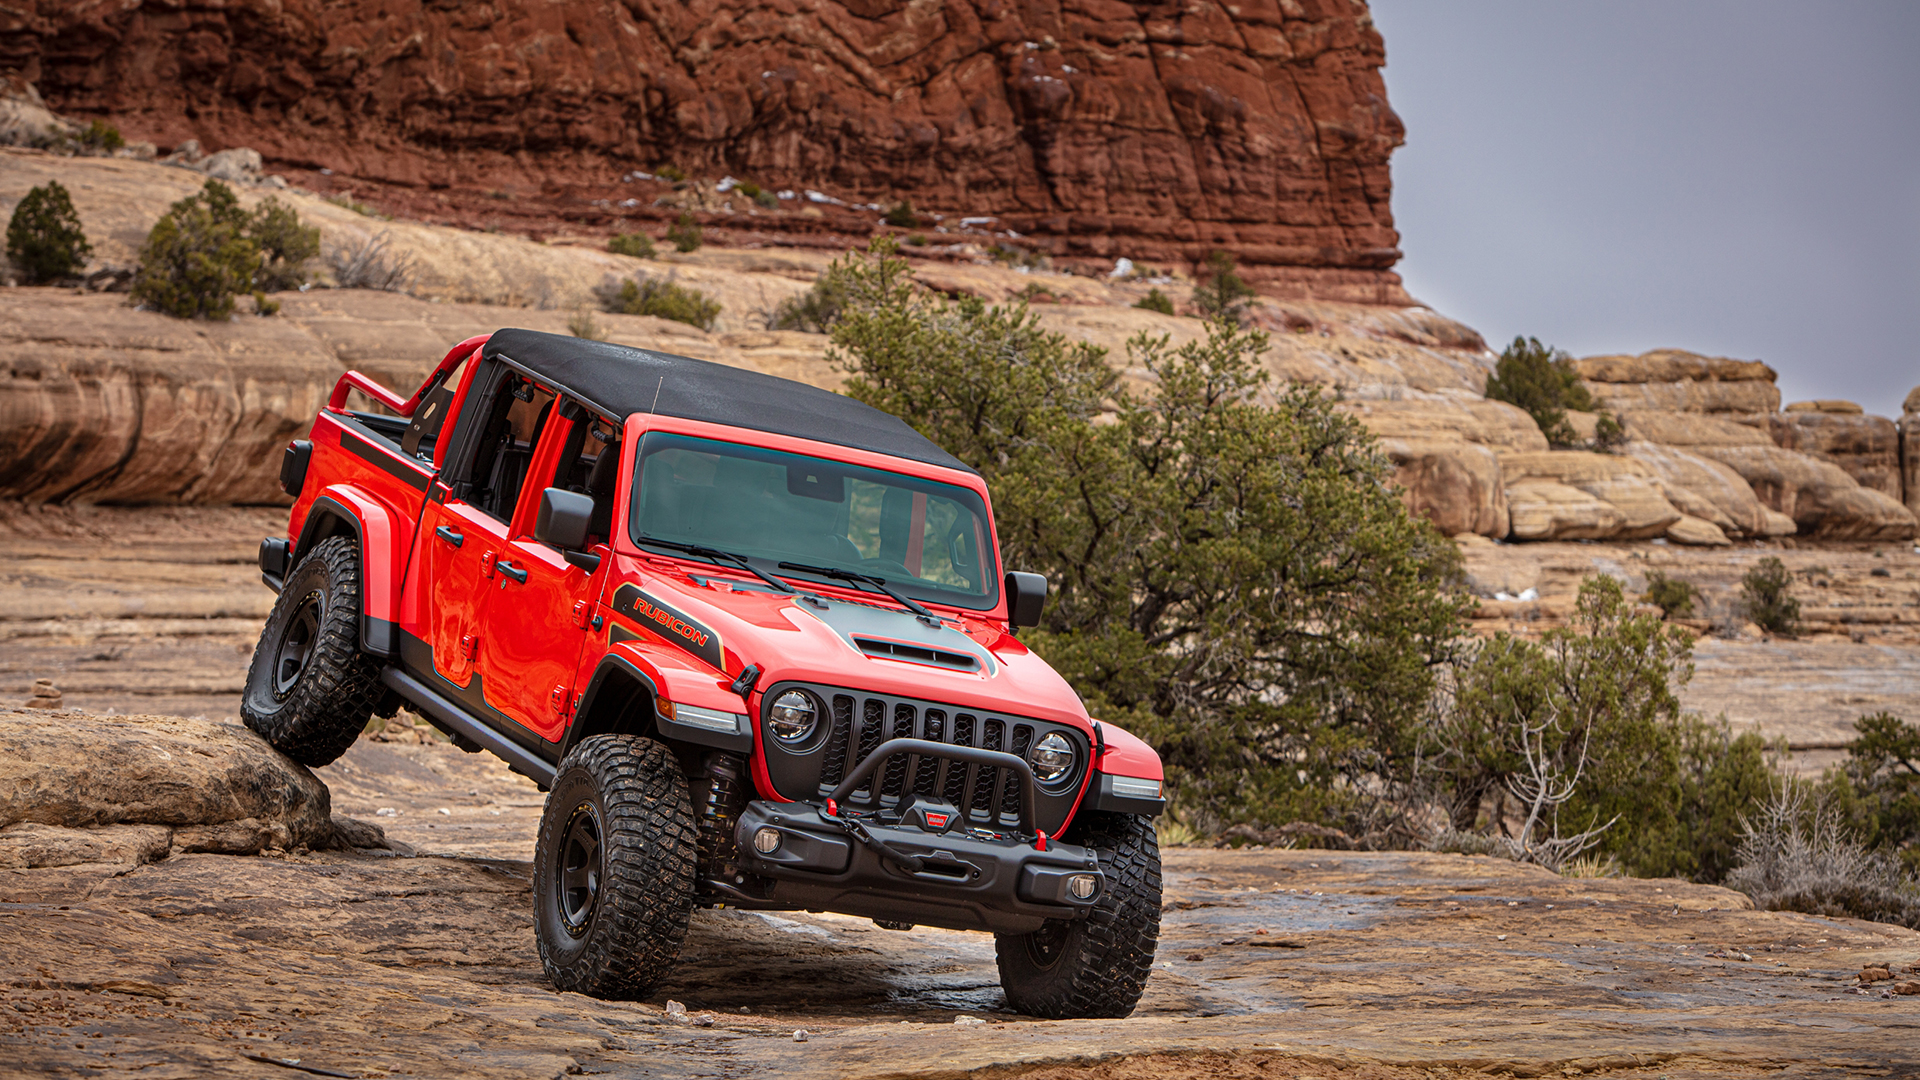 The Jeep Gladiator is a hunting truck that plays well in the mountains.